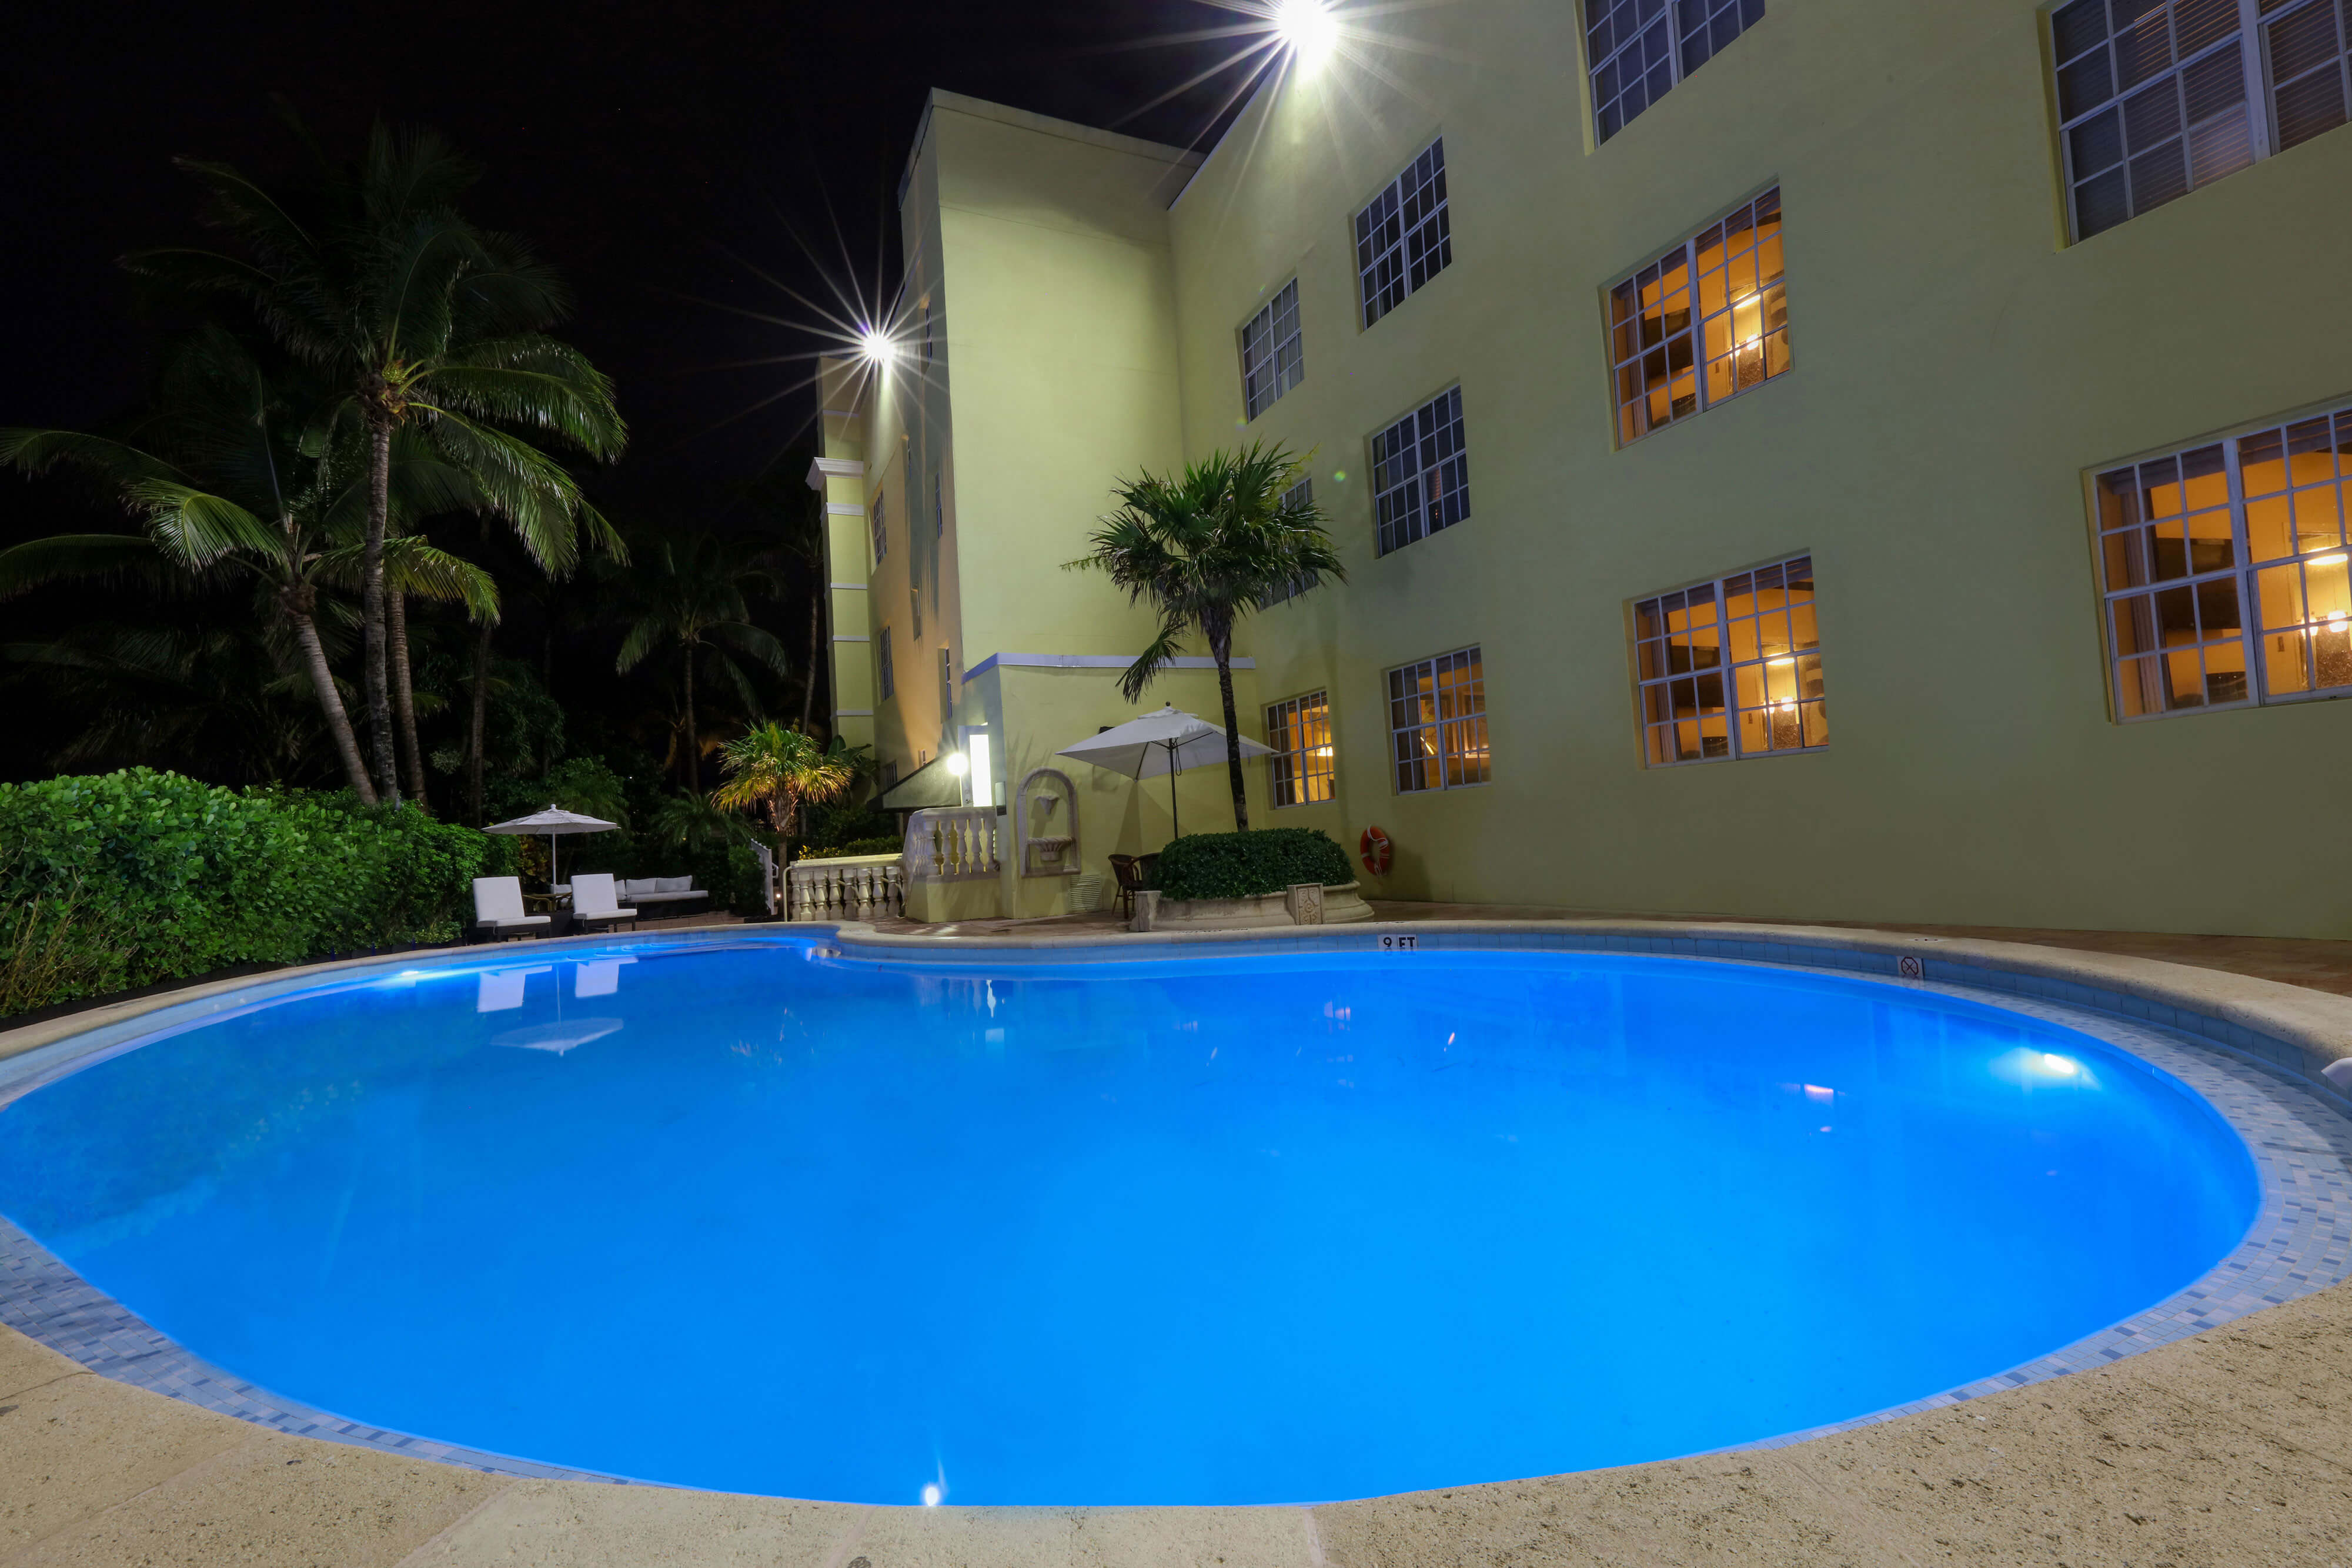 Heated outdoor pool with lounge chairs | Westgate South Beach Oceanfront Resort